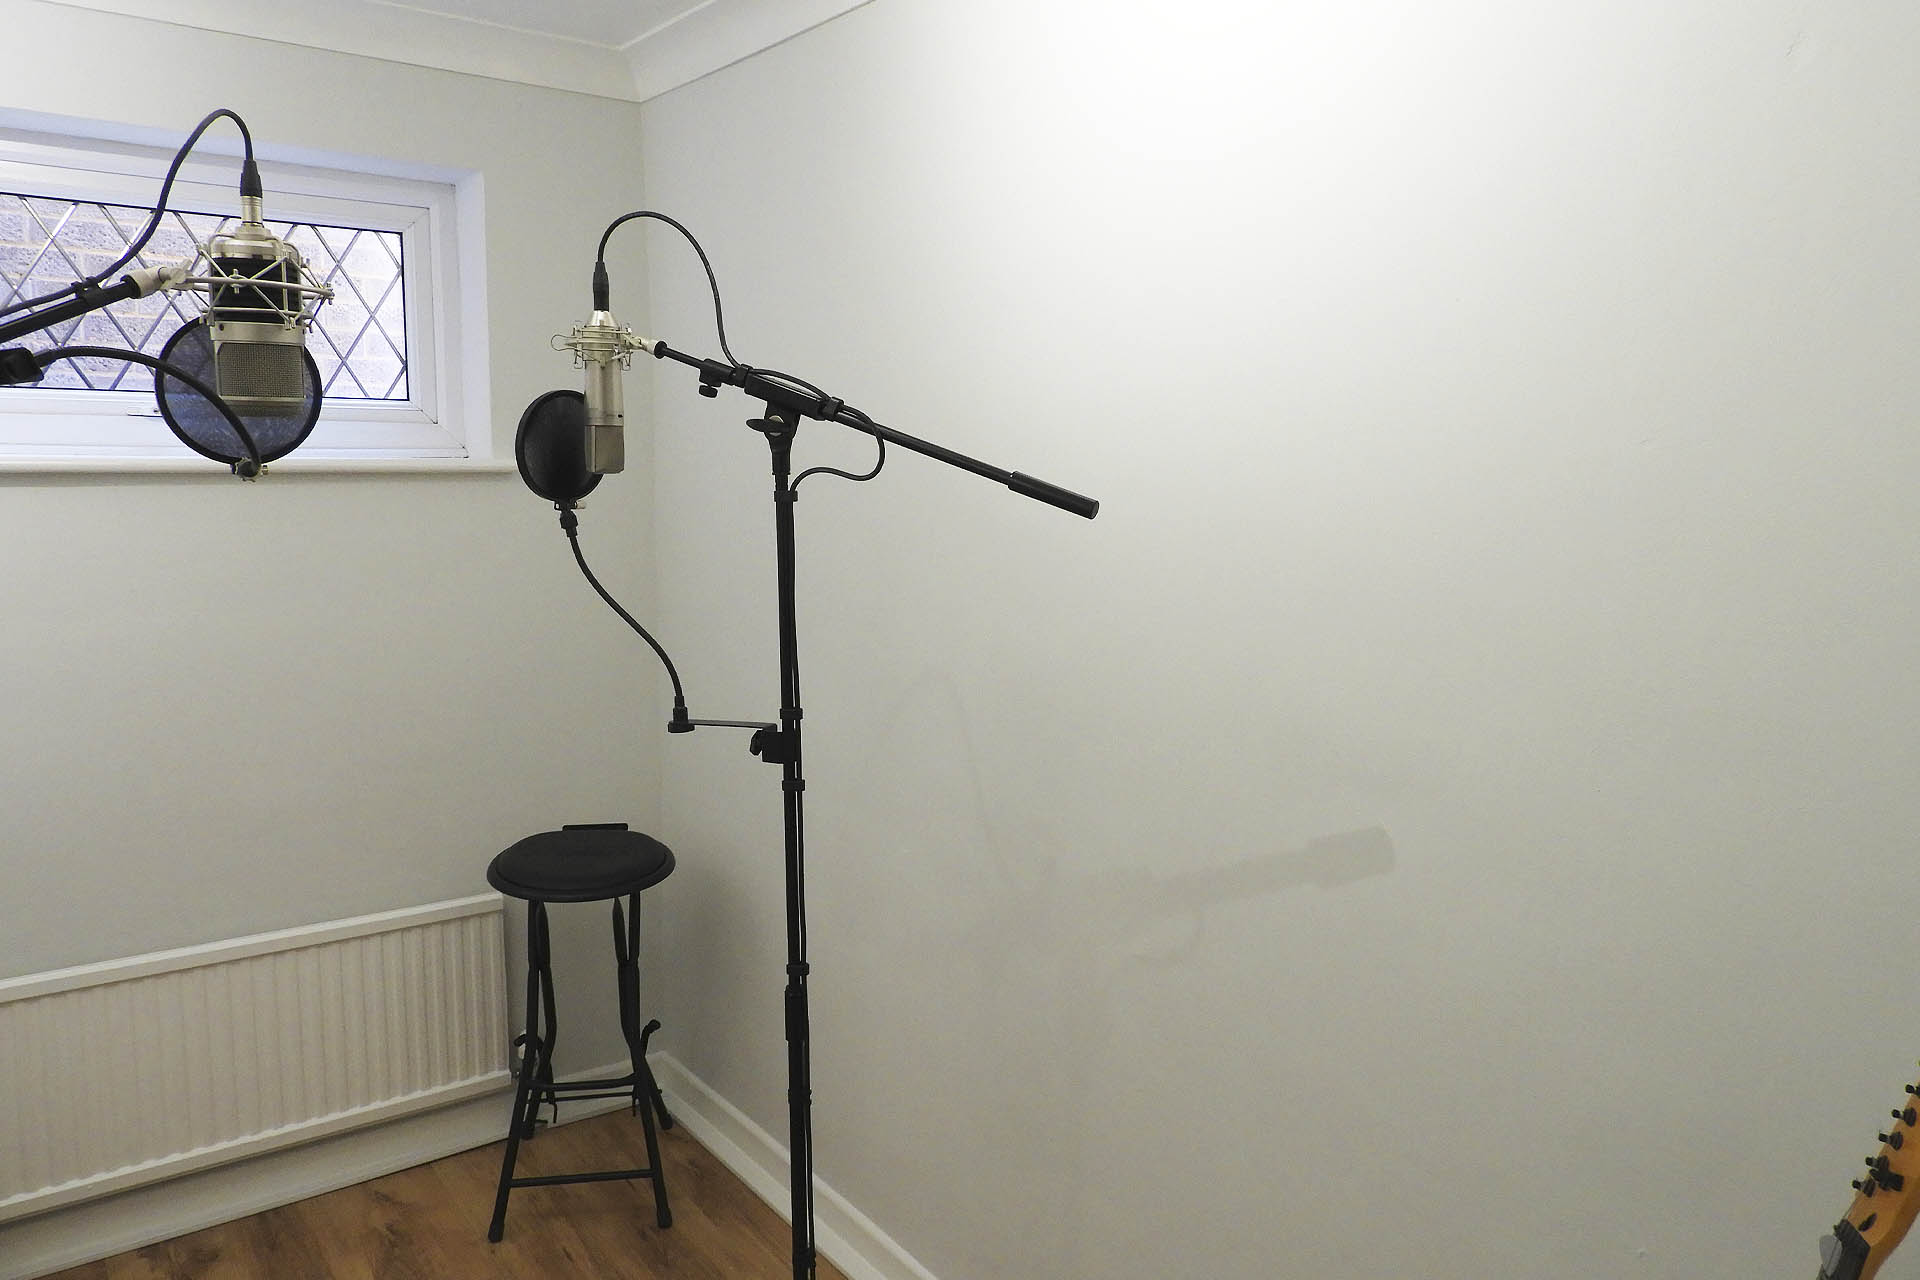 Mic room with bare (untreated) walls